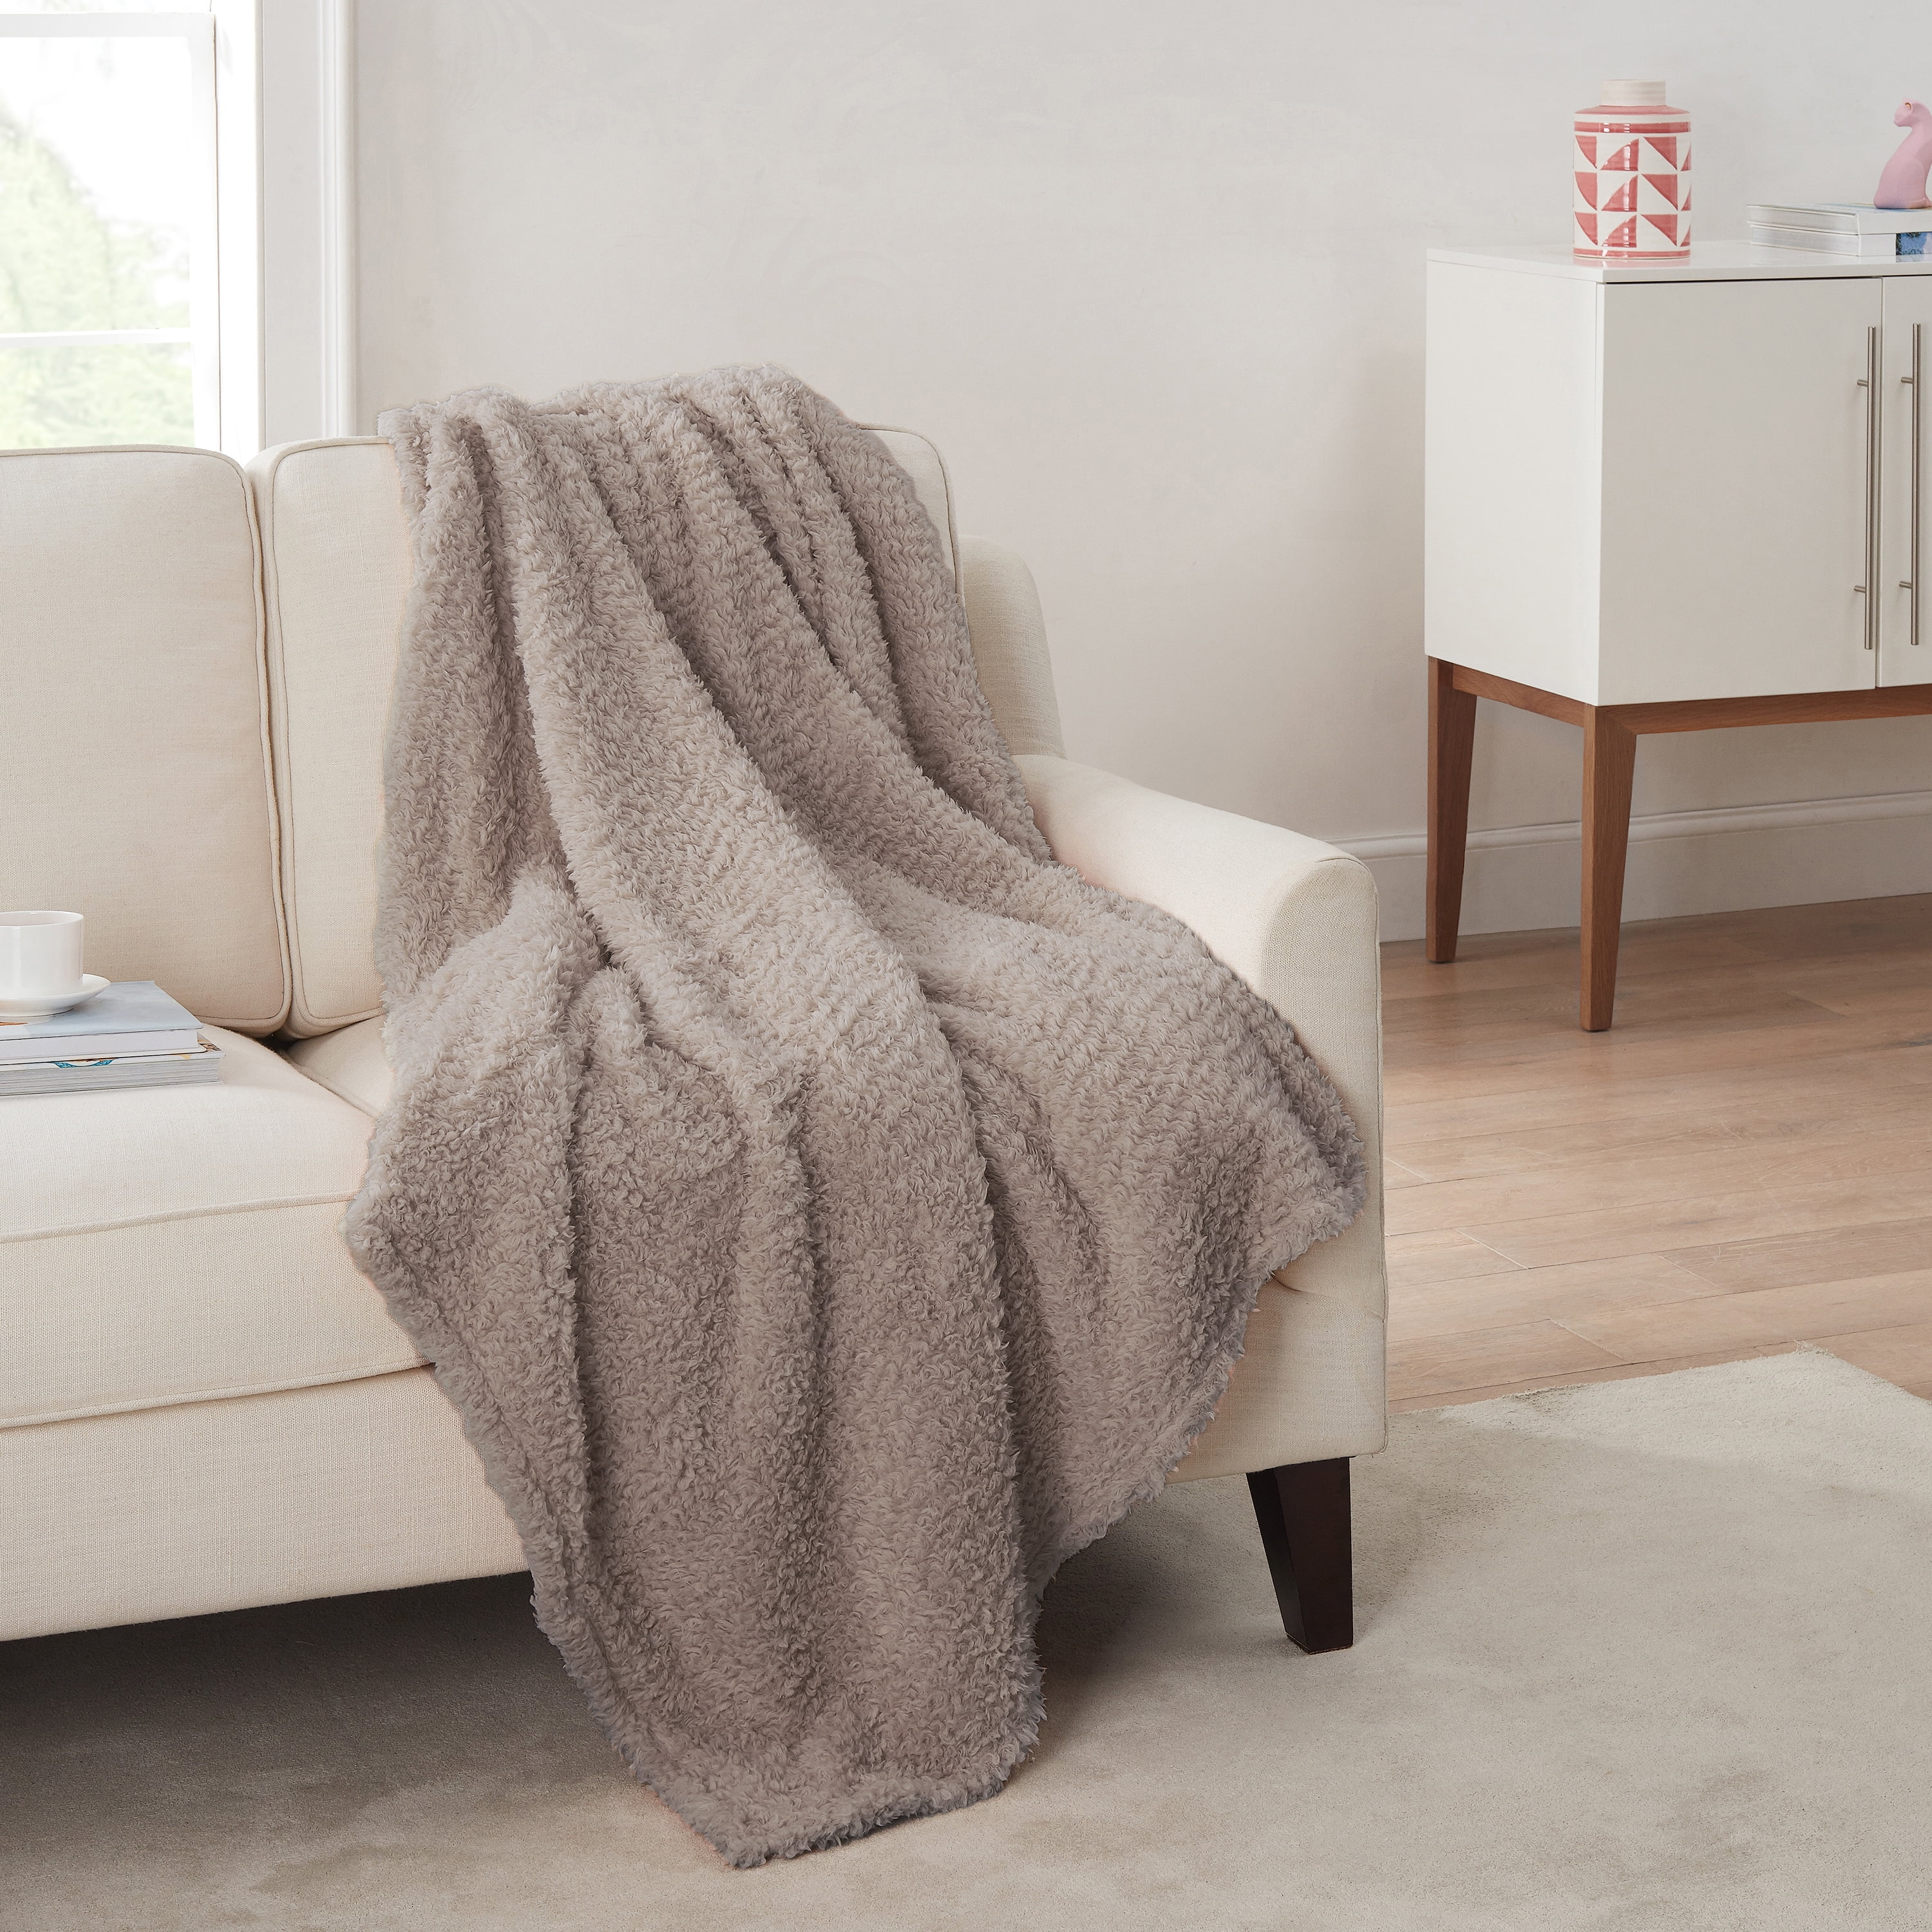 Mainstays Sherpa Throw Blanket 50 X 60, Taupe 